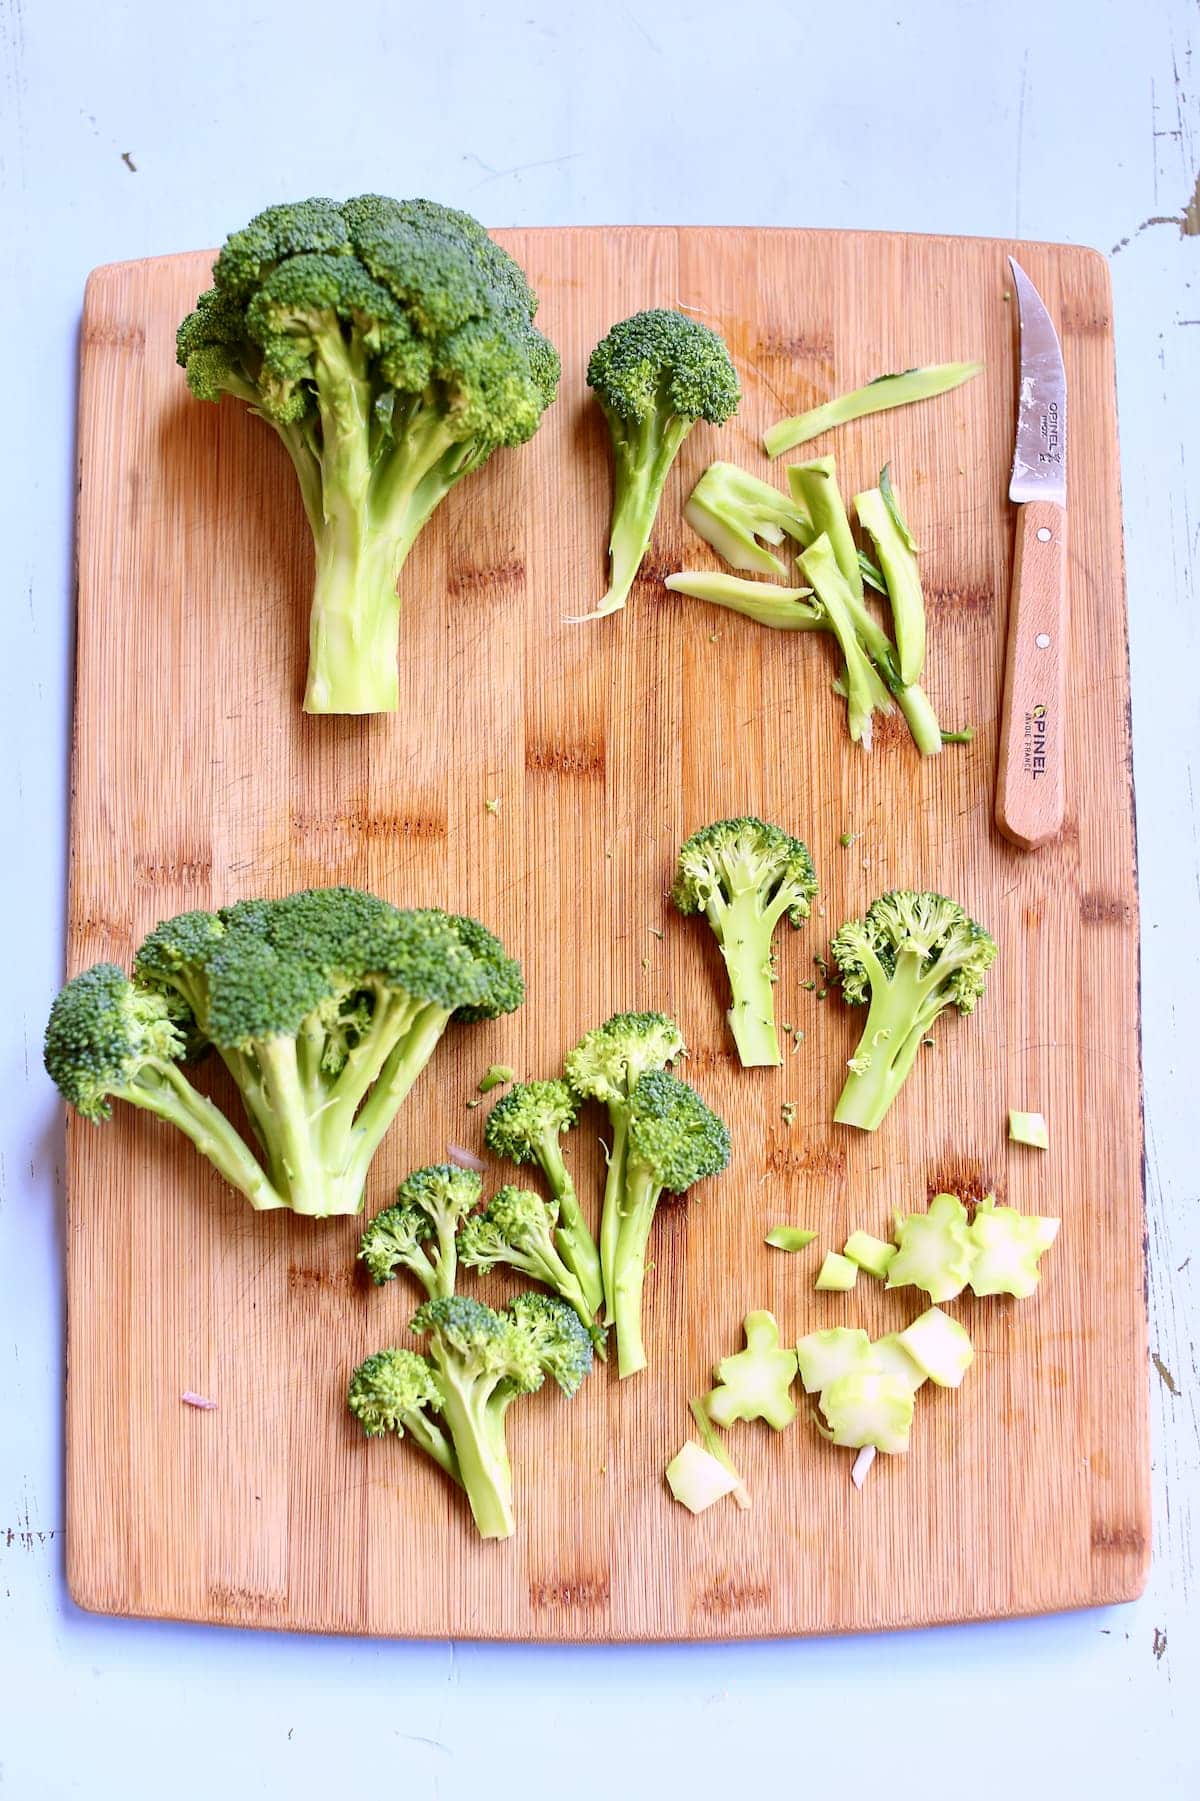 a cutting board of broccoli with a knife.